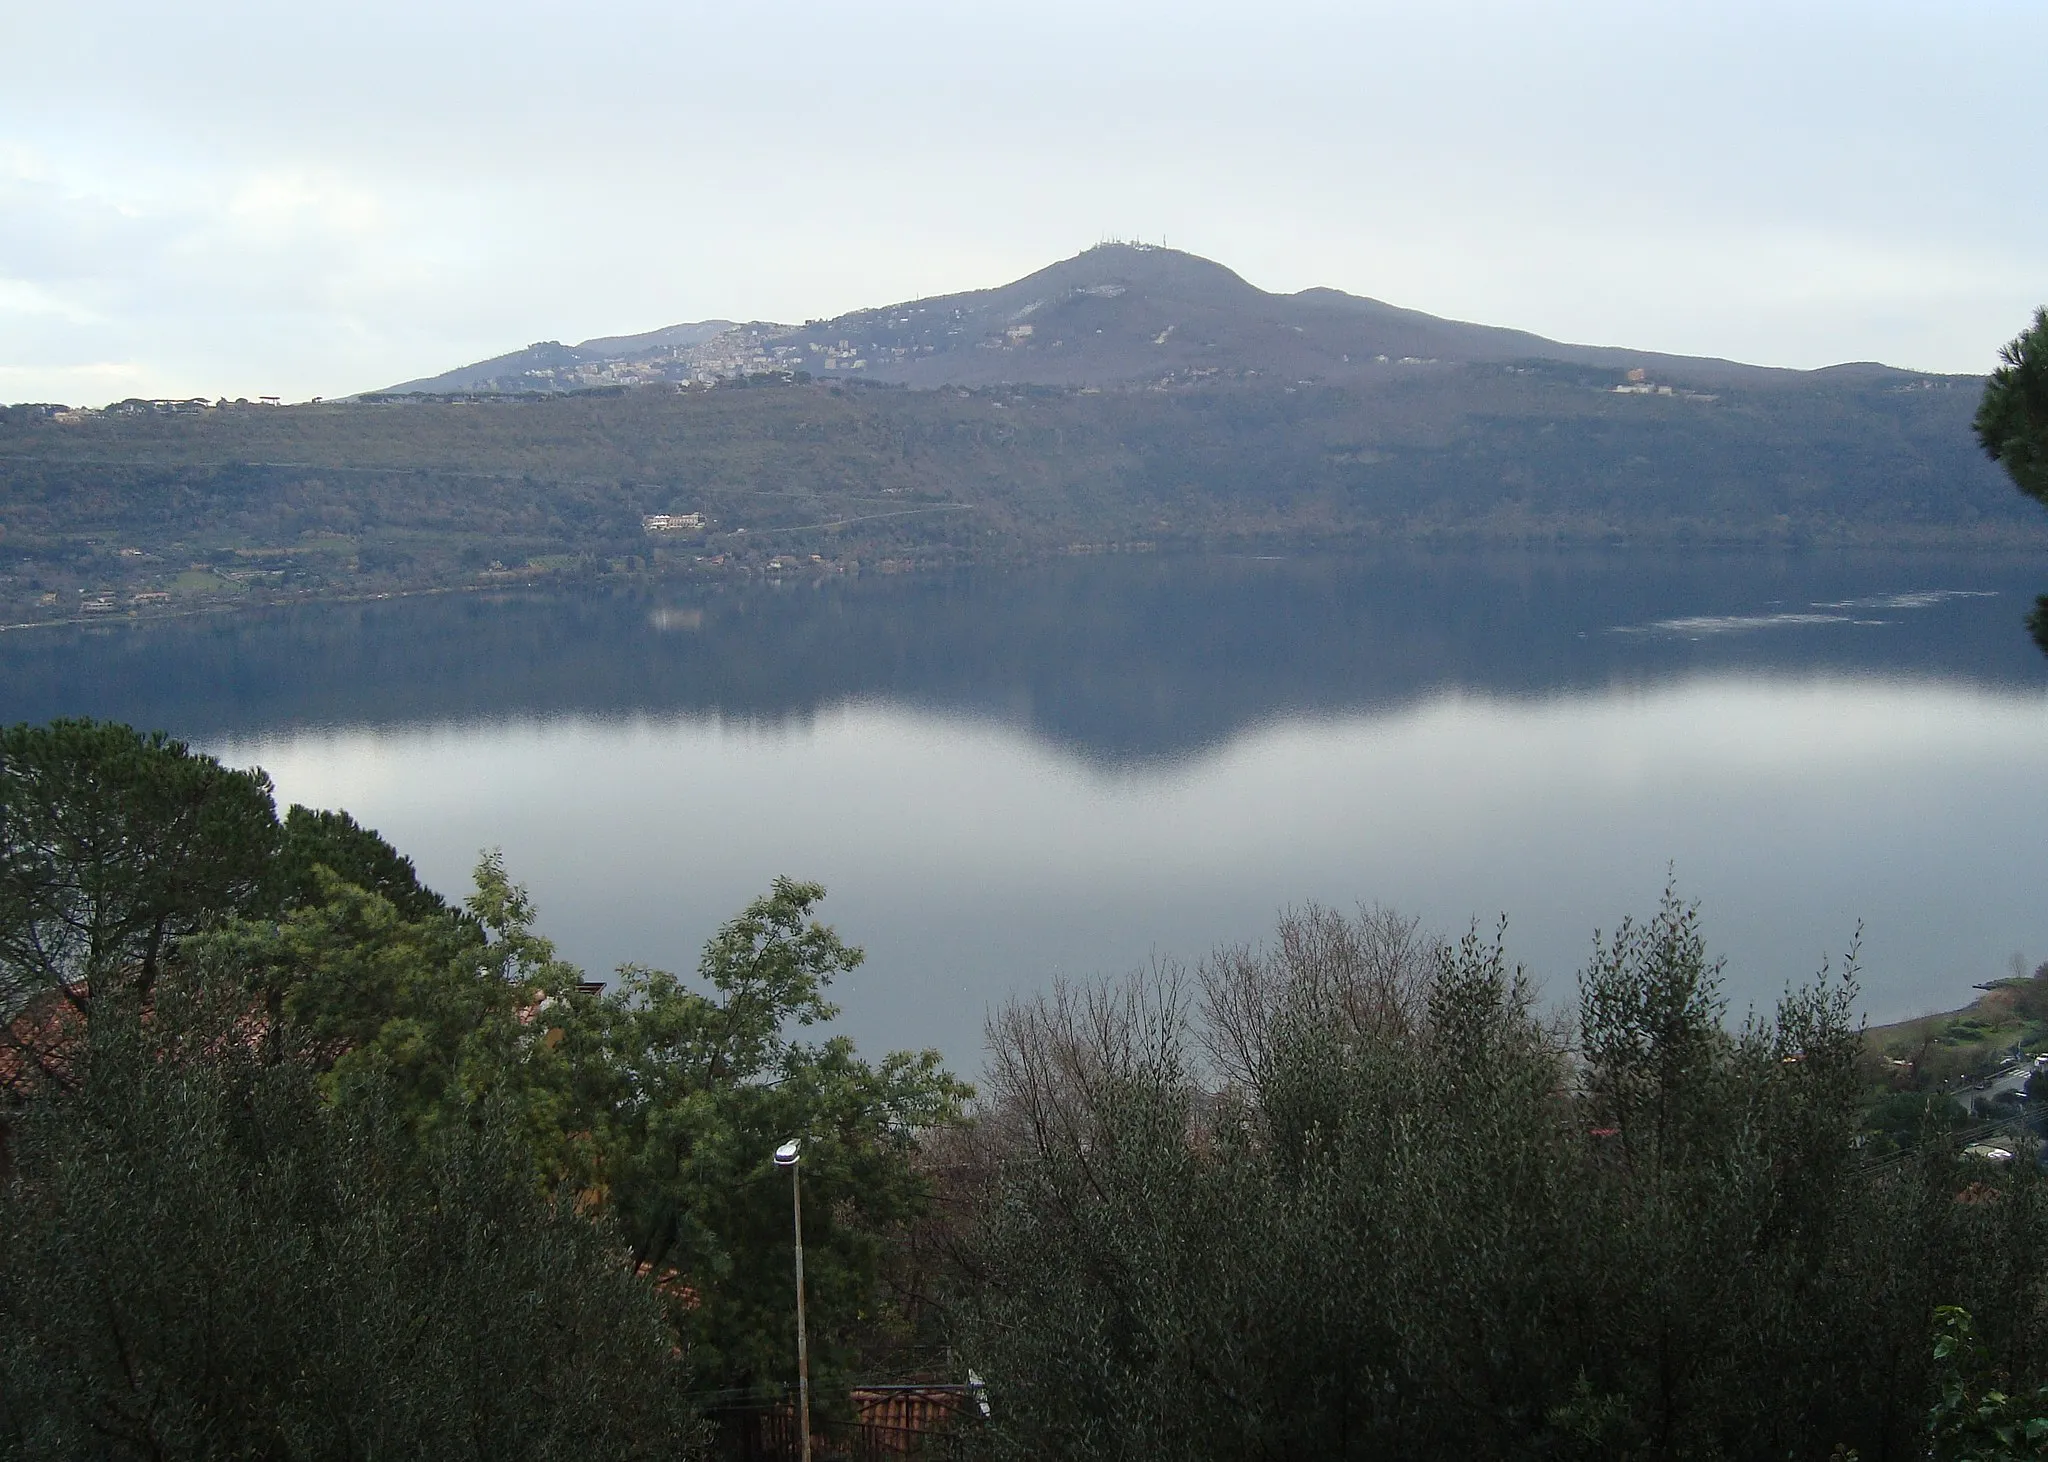 Photo showing: The Monte Cavo or Monte Albano near Frascati and the Lake Albano